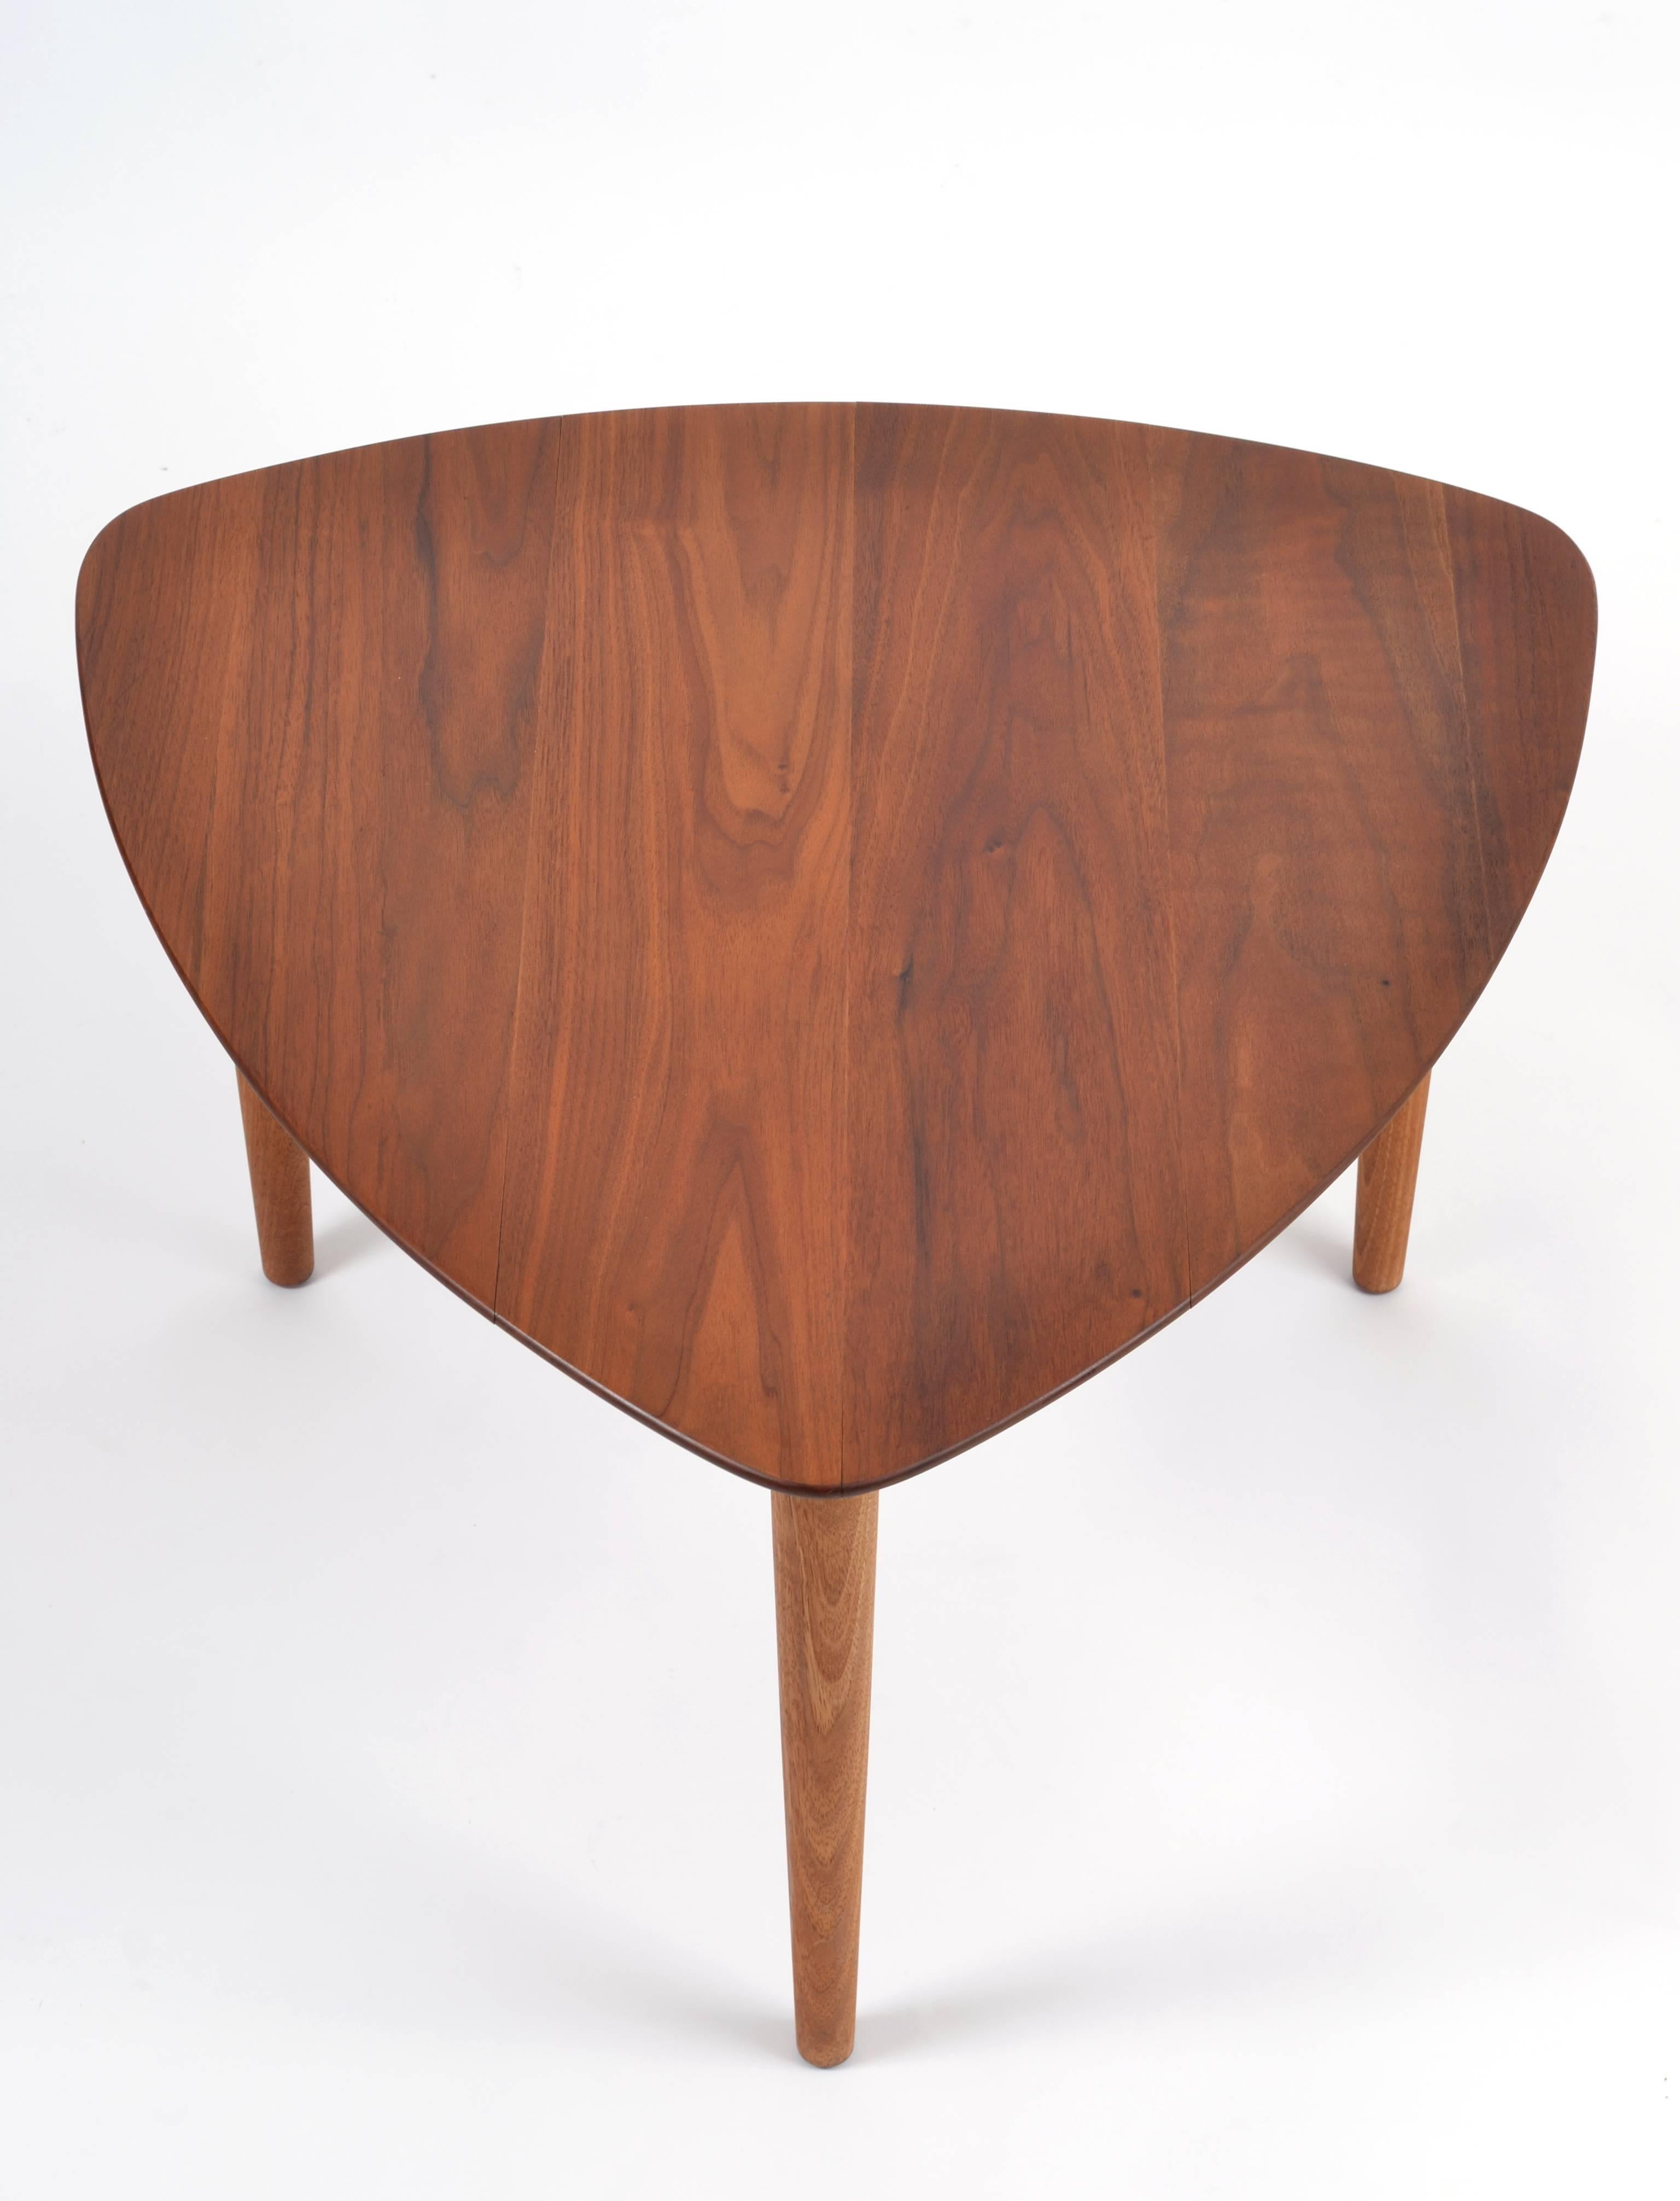 This remarkable walnut table was acquired from the estate of renowned woodworker and woodworking tool designer Jerry Glaser.